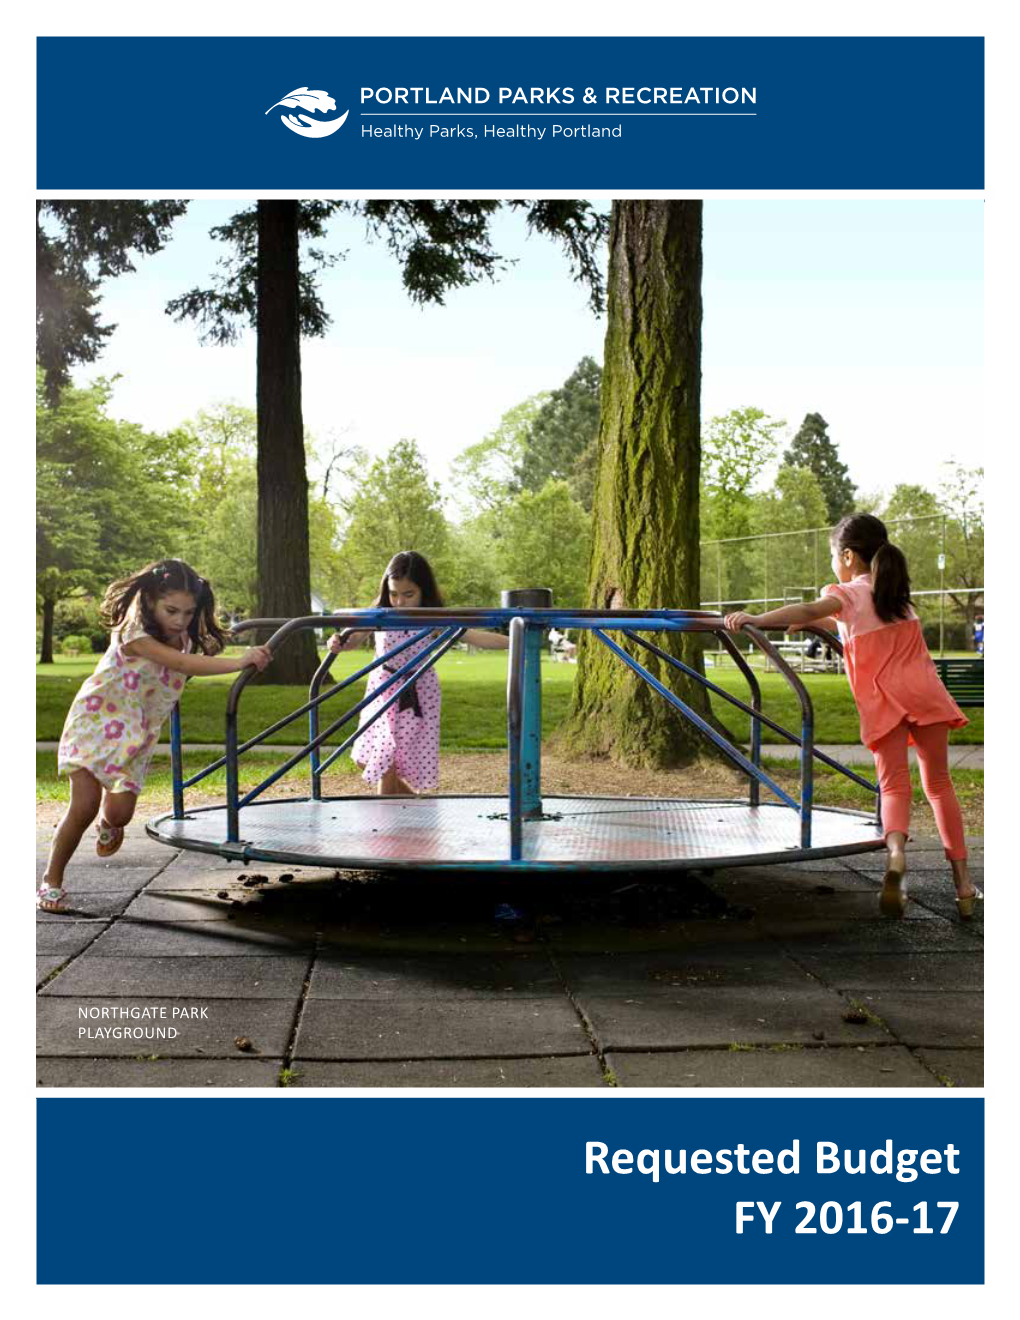 Requested Budget FY 2016-17 Portland Parks & Recreation FY 2016-17 Requested Budget